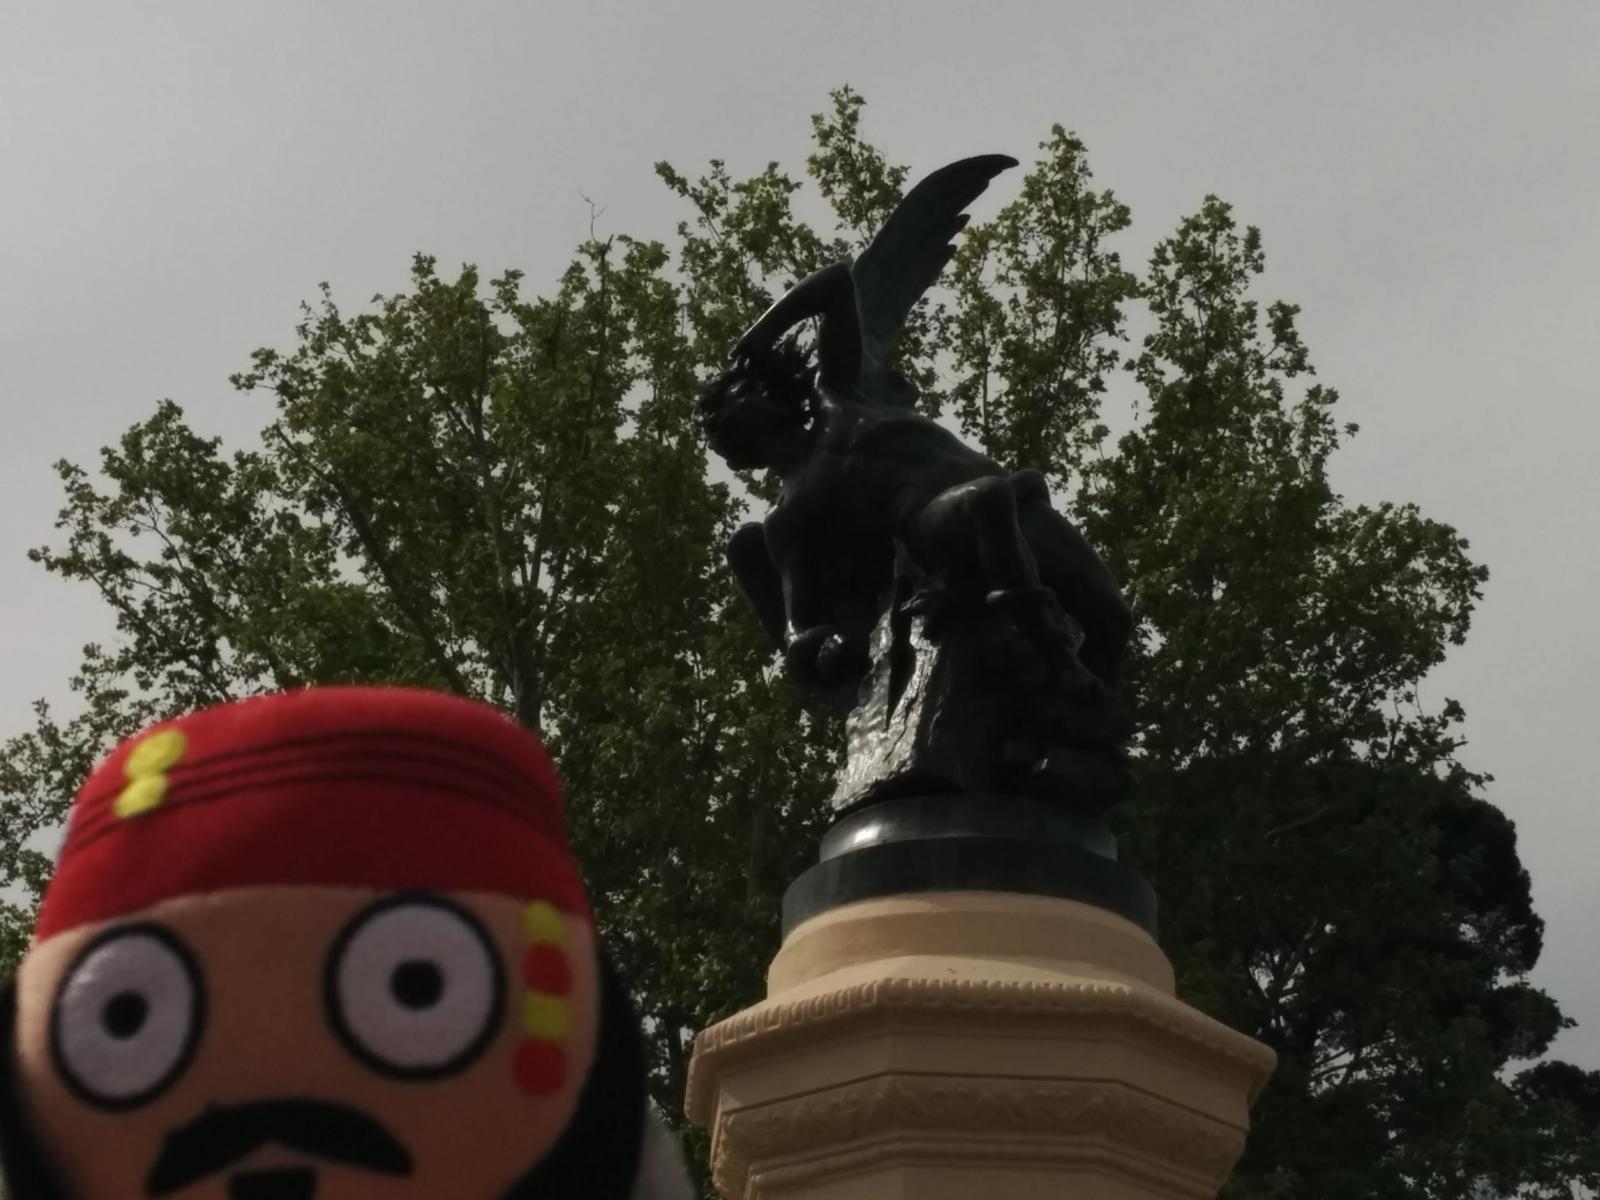 @travellingjack at the statue of Satan